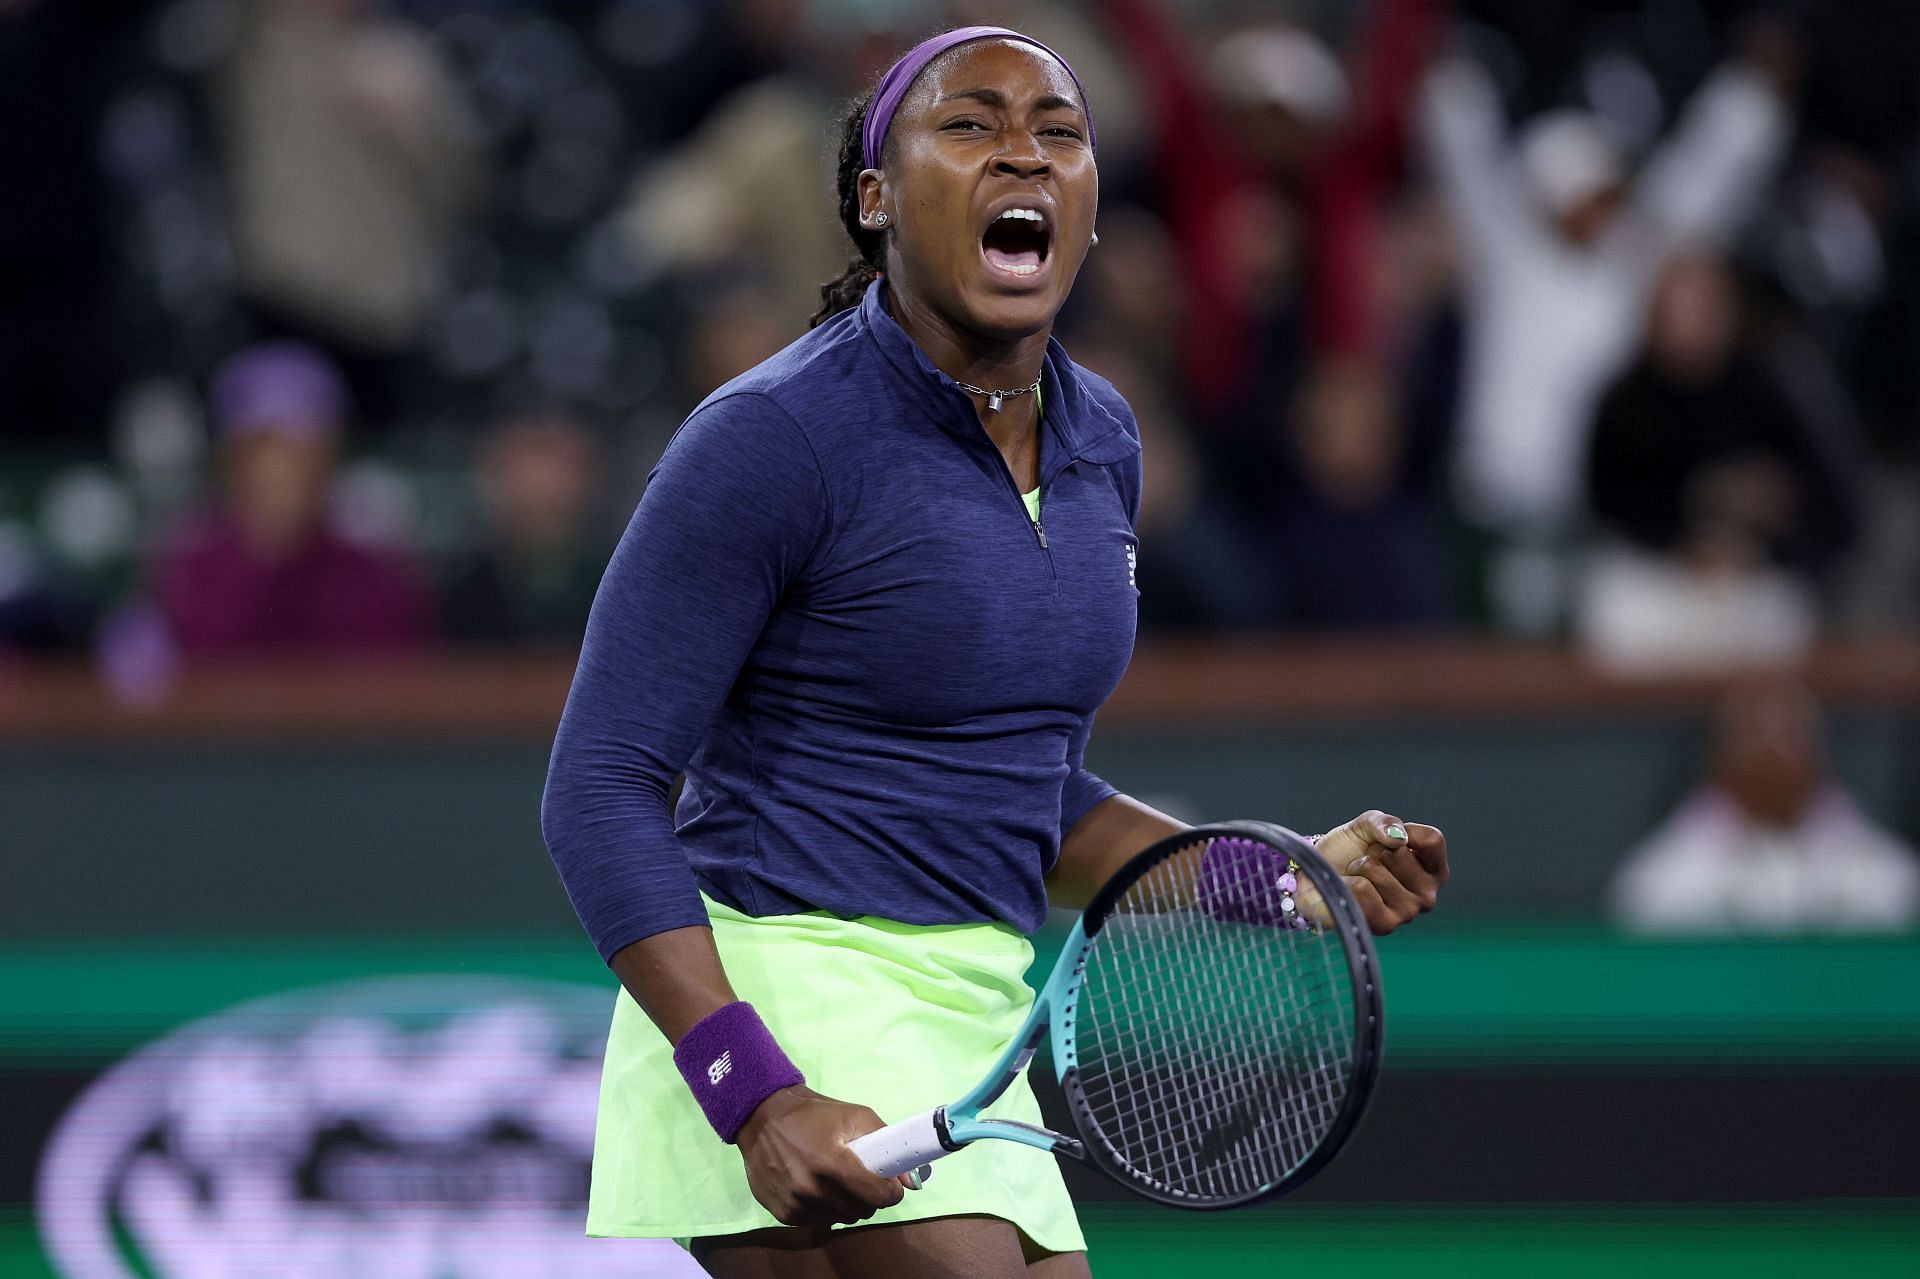 Coco Gauff is the third seed.